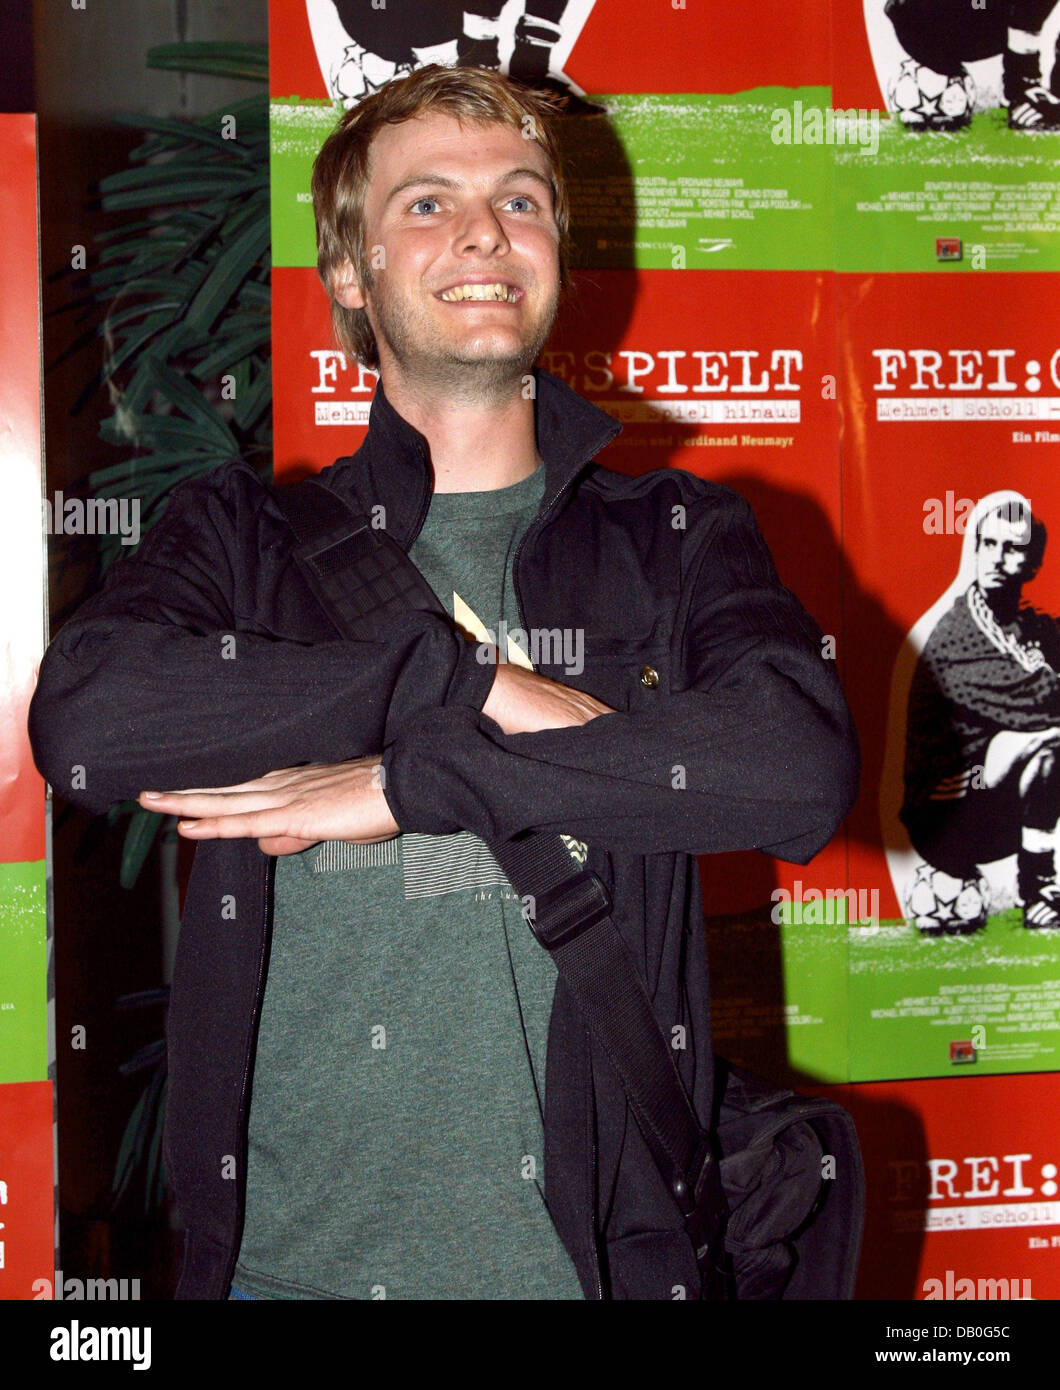 Peter Brugger of rock band Sportfreunde Stiller poses as he arrives for the premiere of 'Free:Played' ('Frei:Gespielt') in Munich, Germany, 23 August 2007. The documentary is an hommage to recently retired 36-year-old German winger Mehmet Scholl, one of his generation's most gifted football players, a very nice guy and all mothers-in-law's delight. Photo: Ursula Dueren Stock Photo